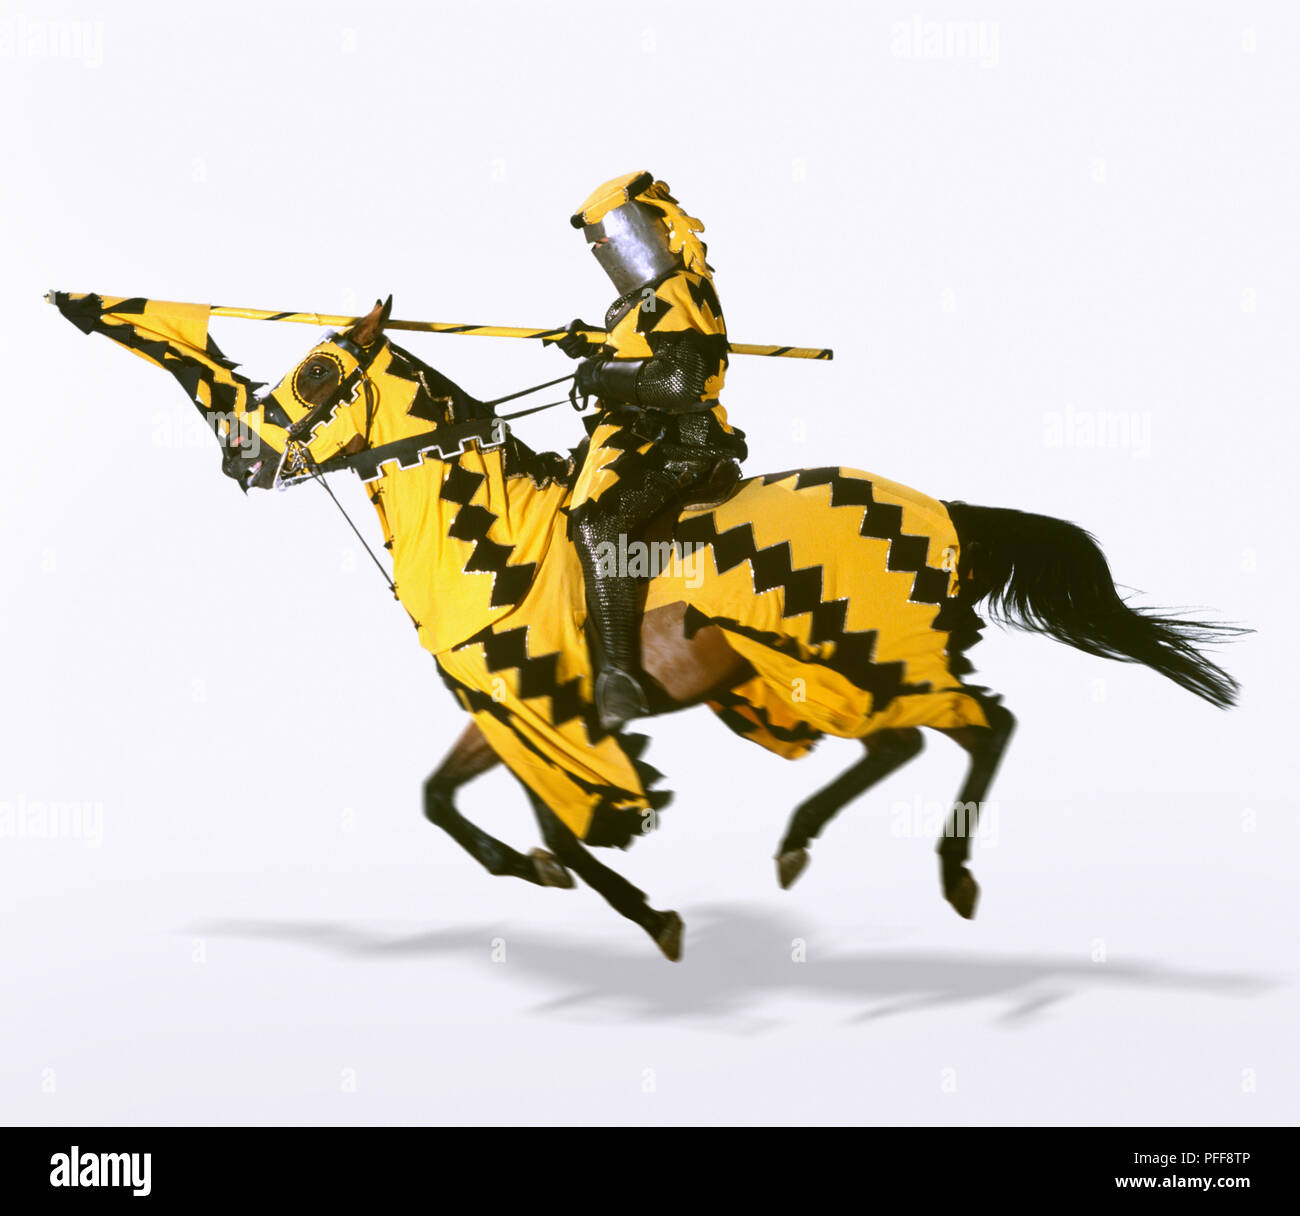 Knight charging ahead on horseback with pointed spear, horse draped in yellow and black fabric matching knight's uniform, side view. Stock Photo